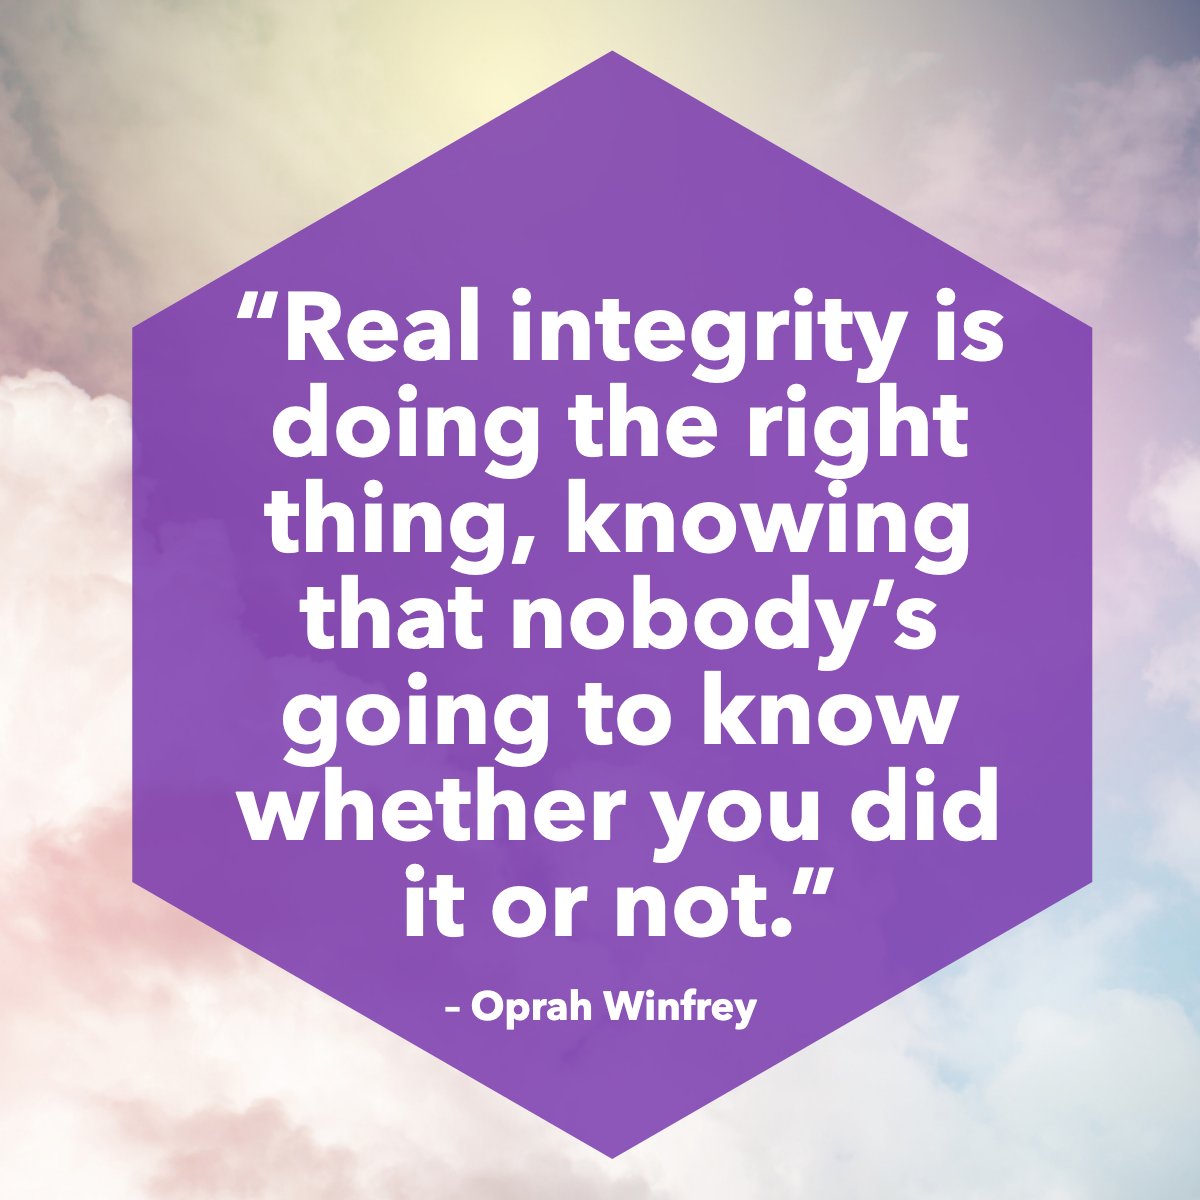 Integrity is a choice we make, and it's a choice we must keep making, every moment of our lives. 🙌✨

#teamintegrity #integritylife #kindness #change